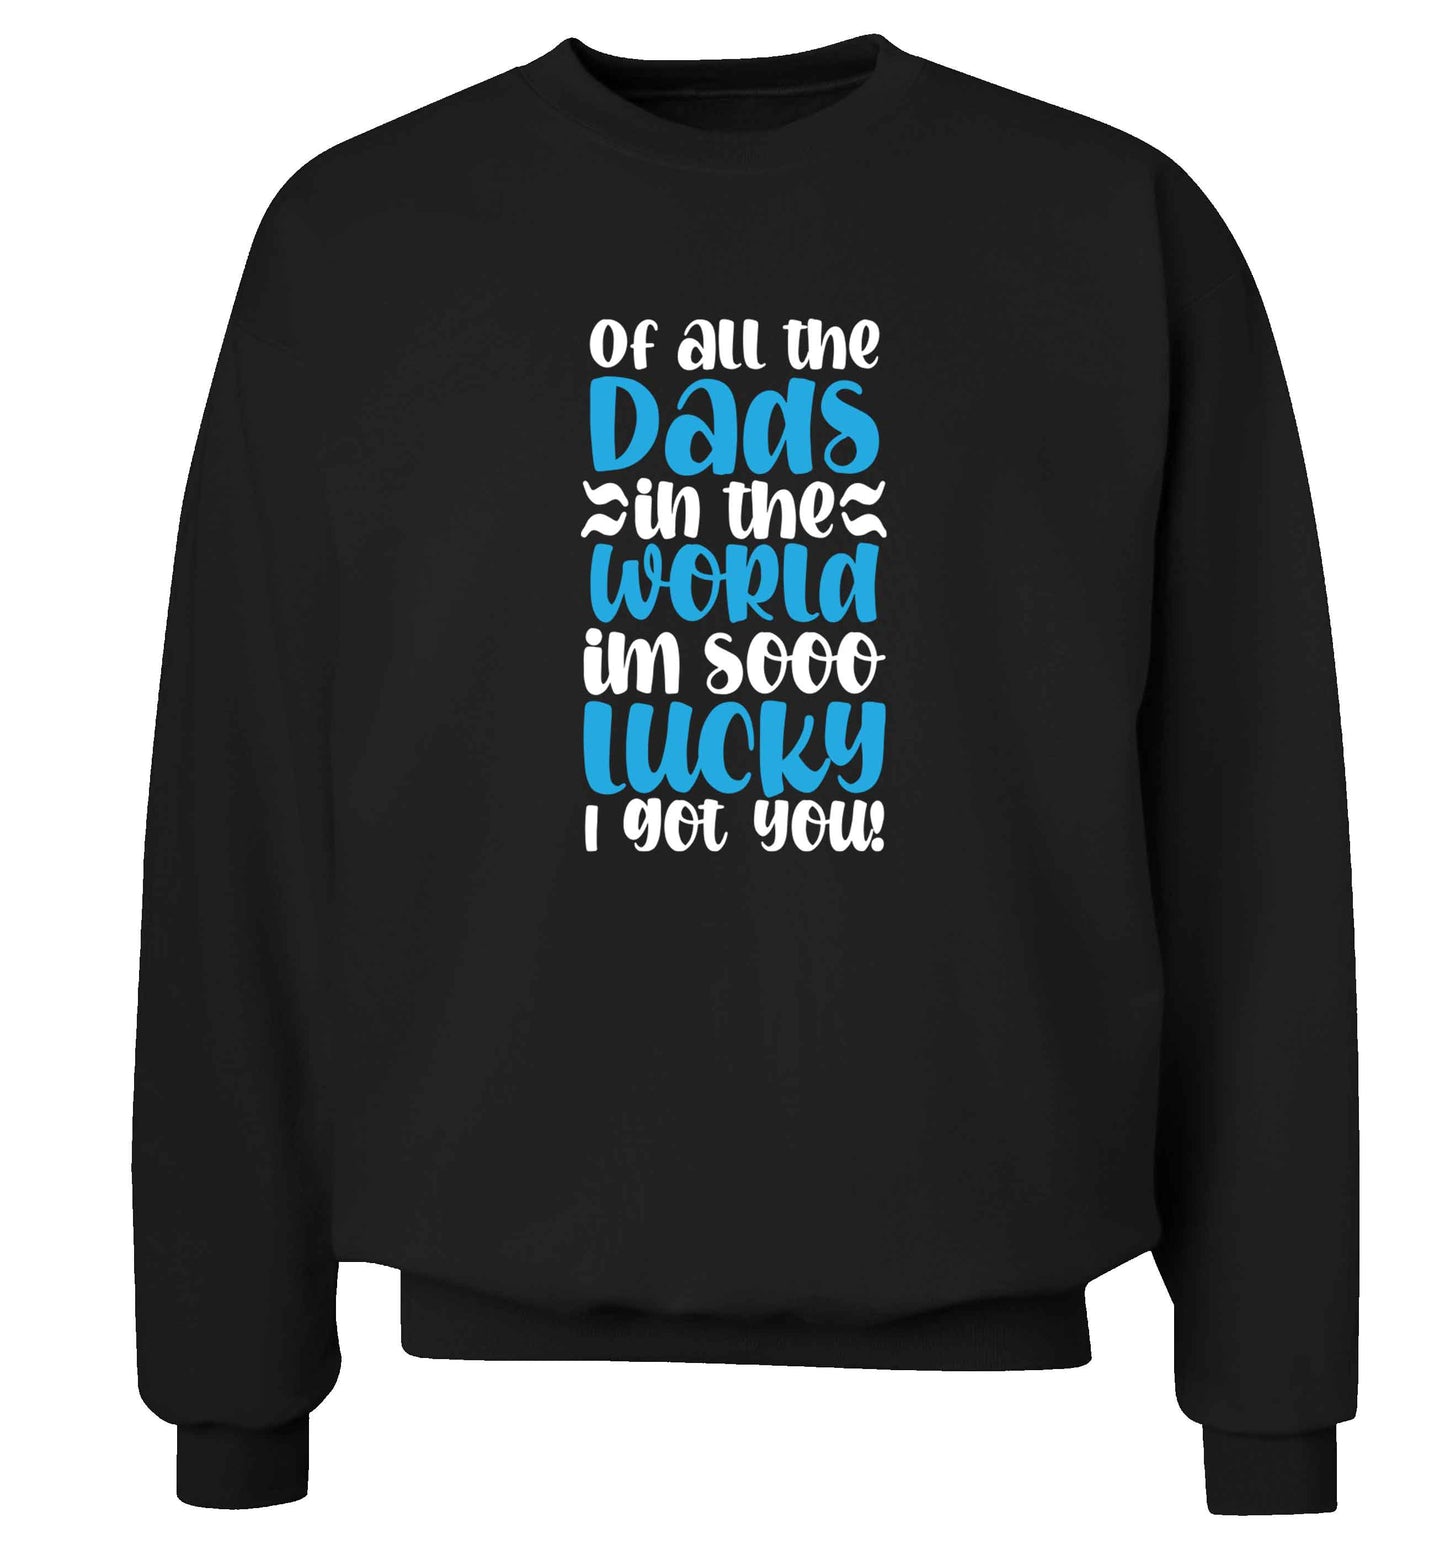 Of all the Dads in the world I'm so lucky I got you adult's unisex black sweater 2XL